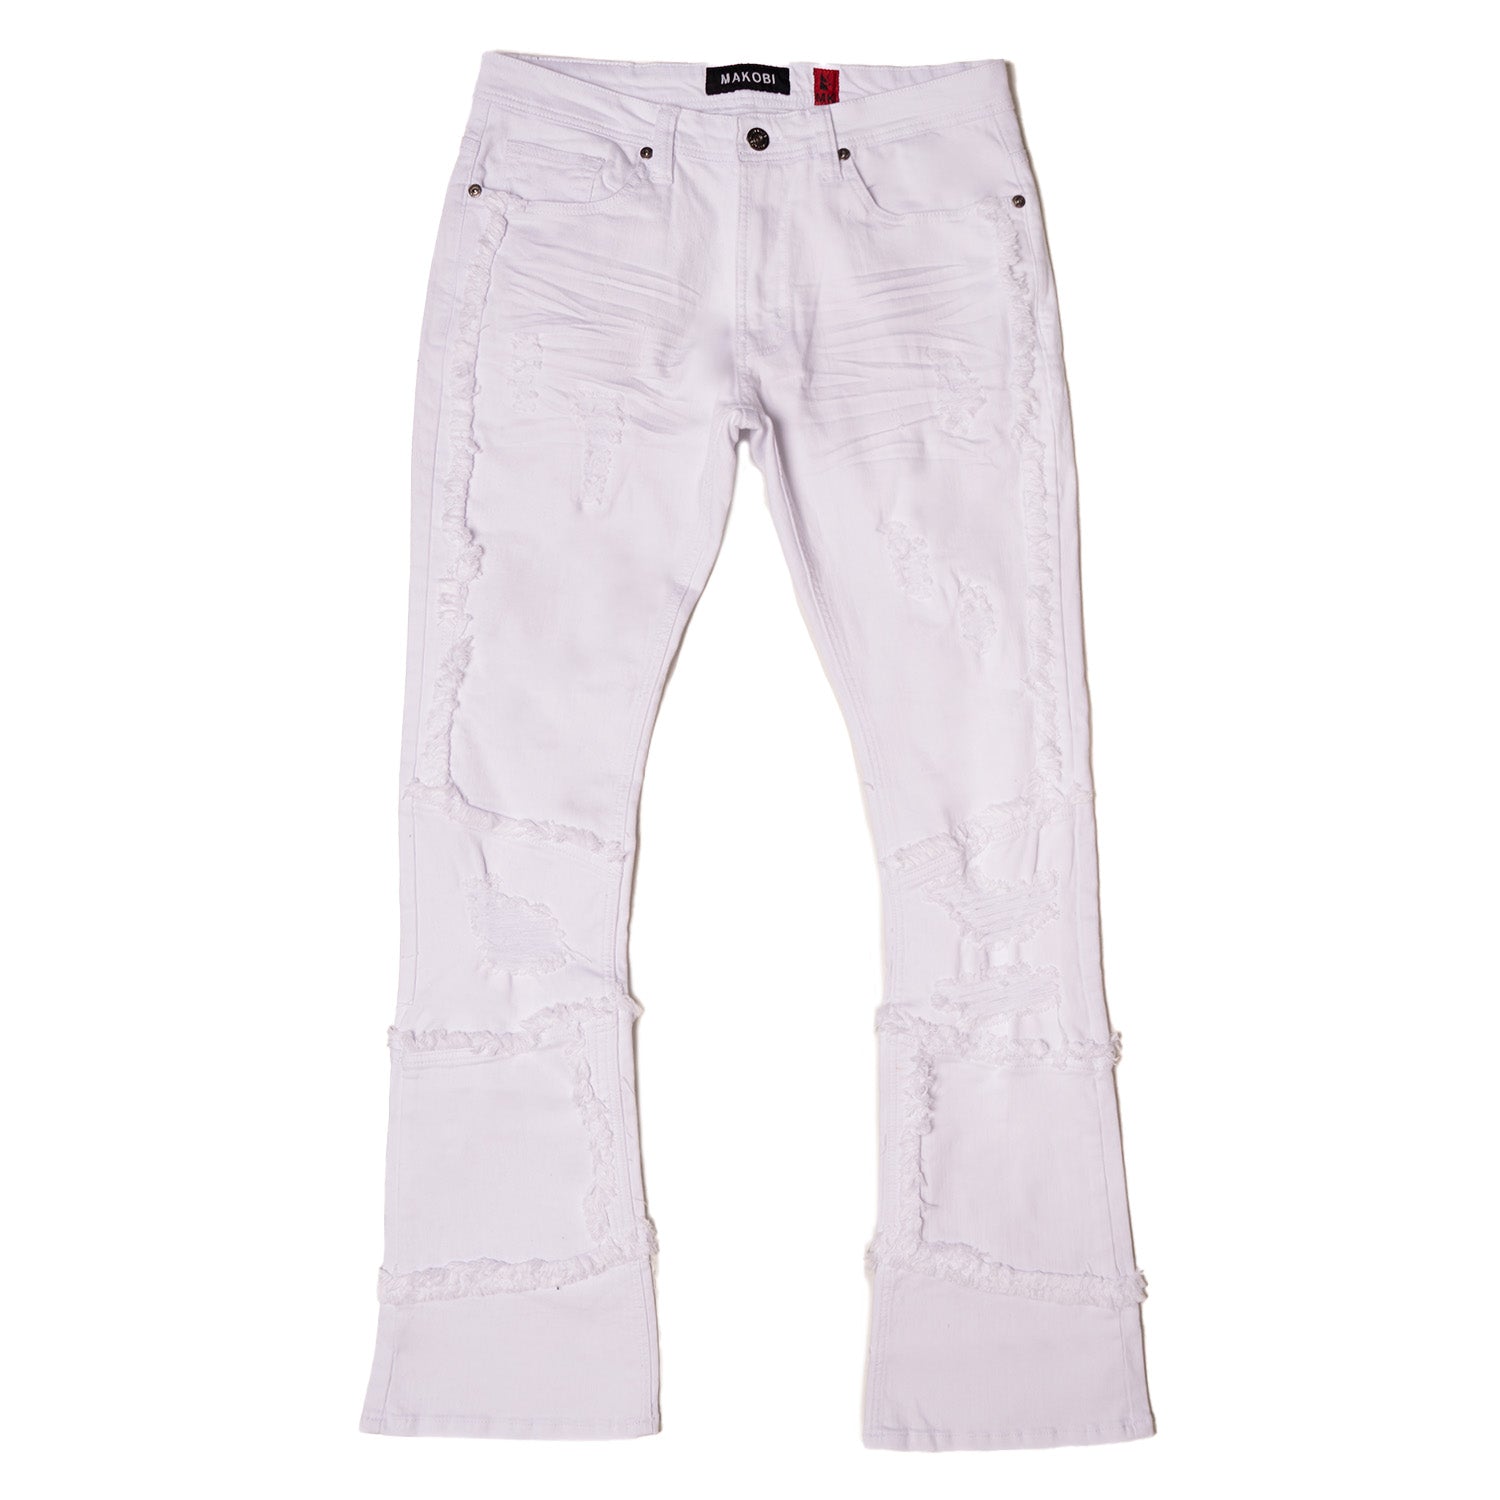 M1997 Gianos Stacked Jeans - White